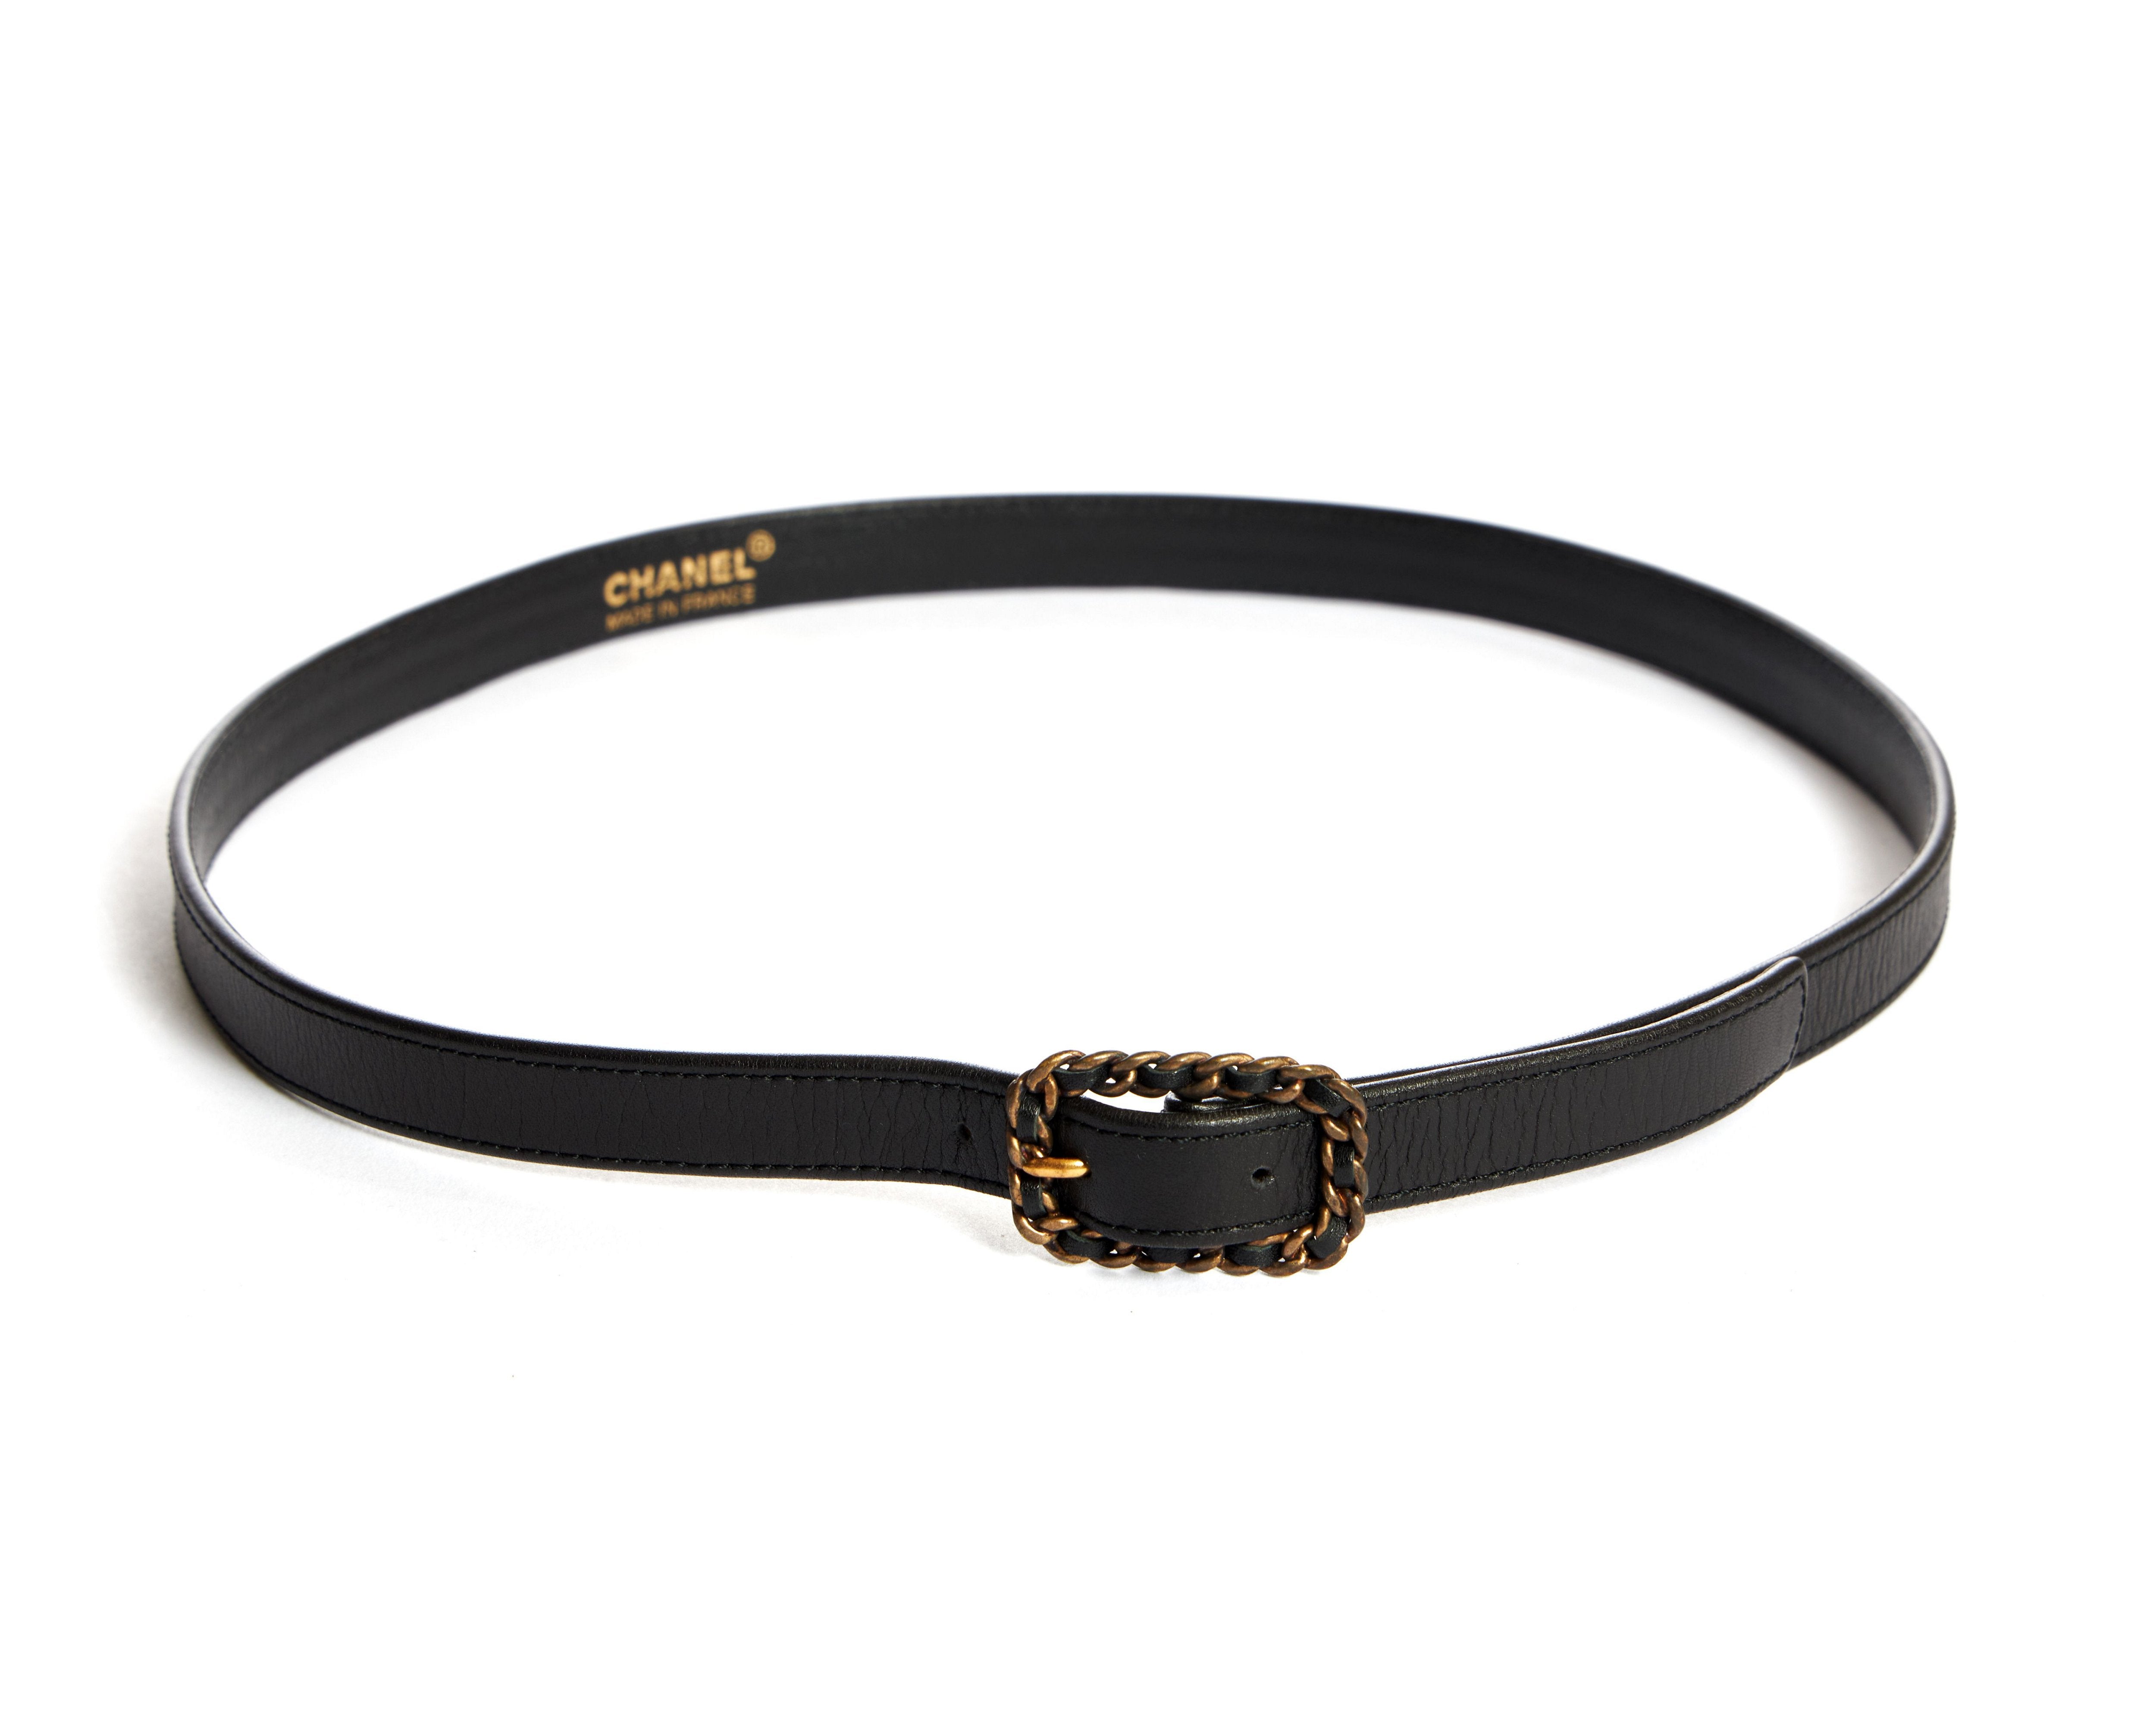 CHANEL Thin Patent Leather Belt with